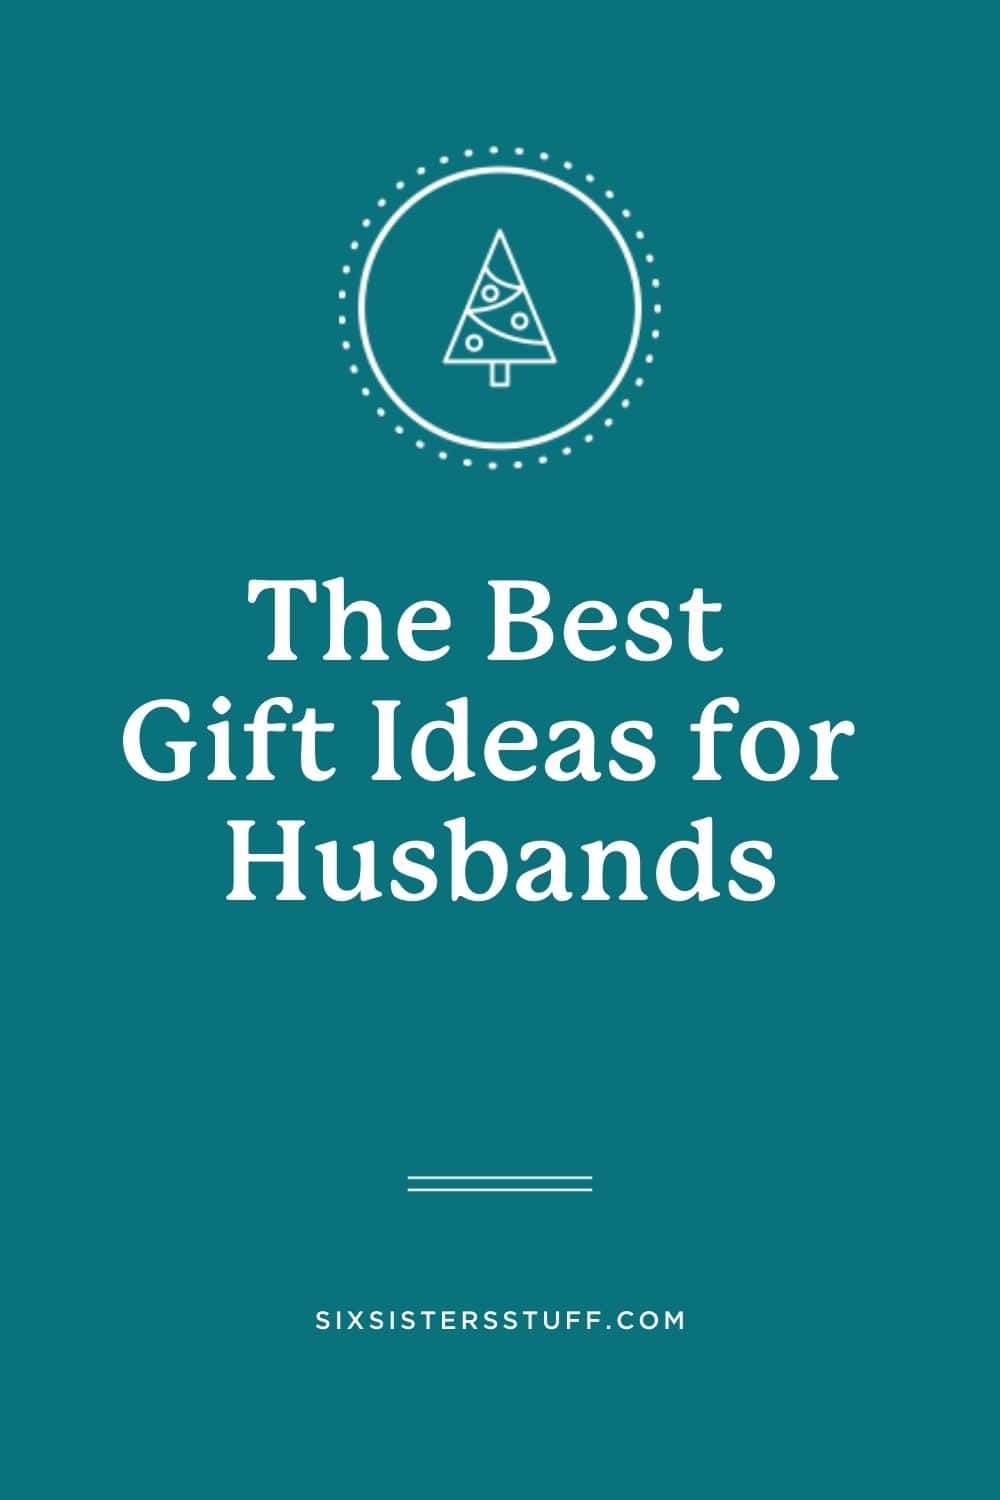 5 Best Gifts to Give Your Partner on the Wedding Day